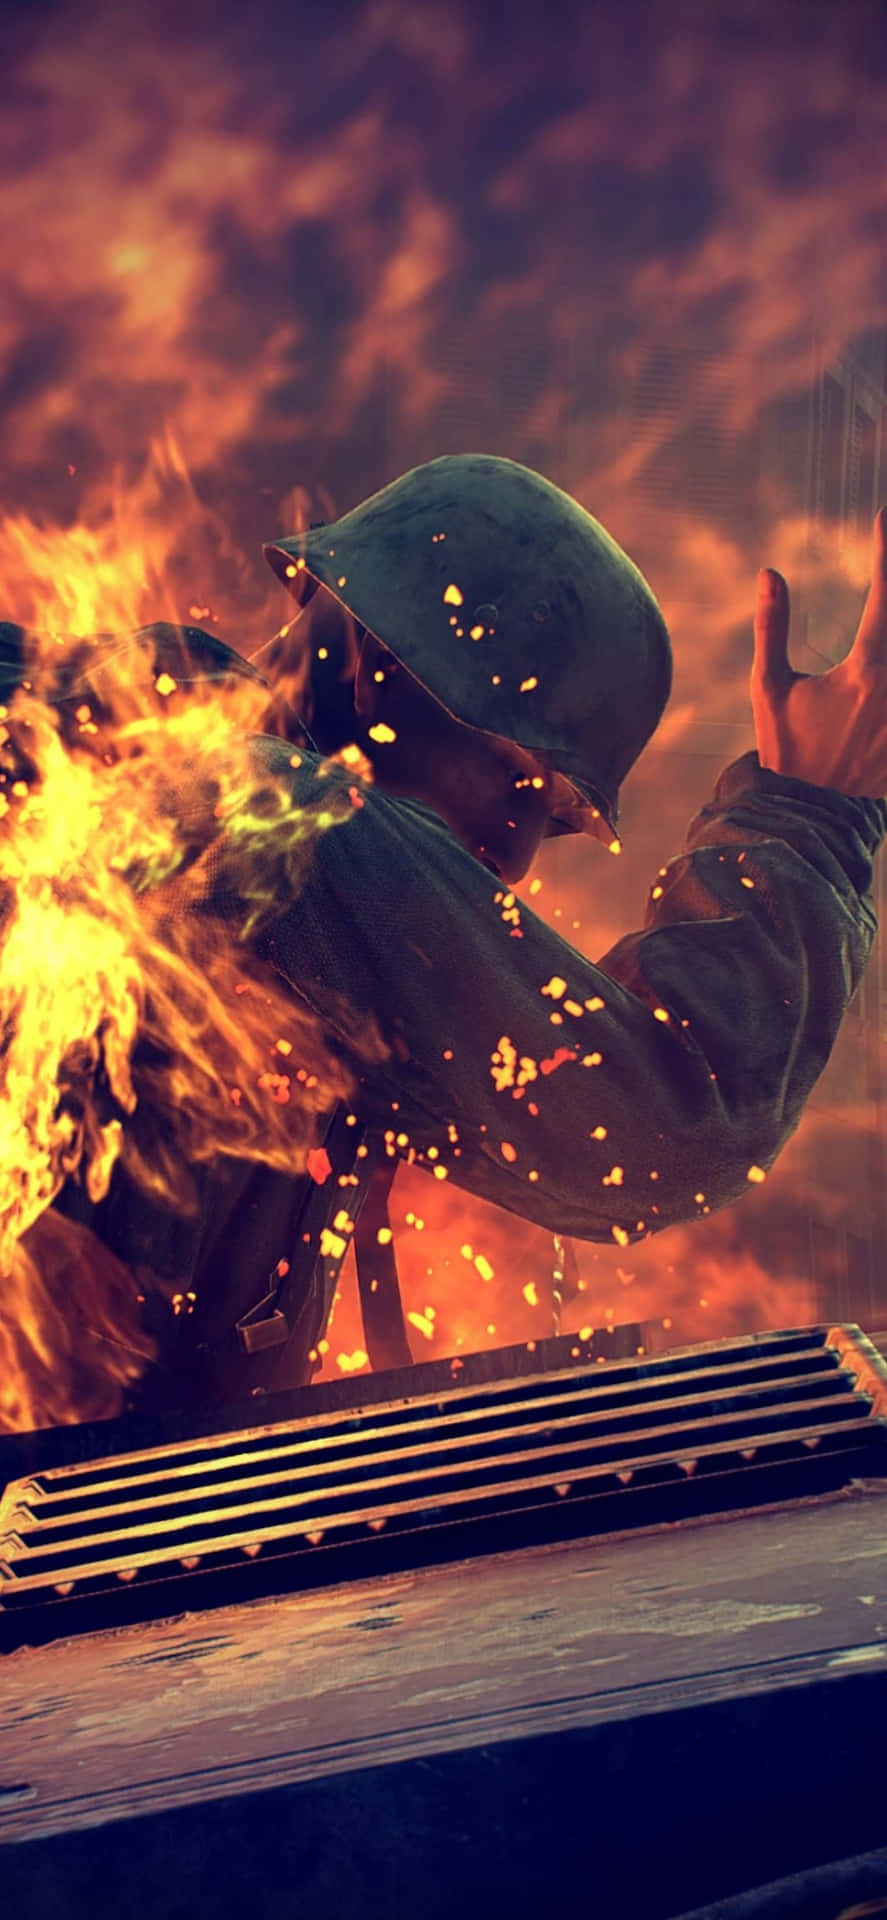 Iphone Xs Max Battlefield V Burning Soldier Background